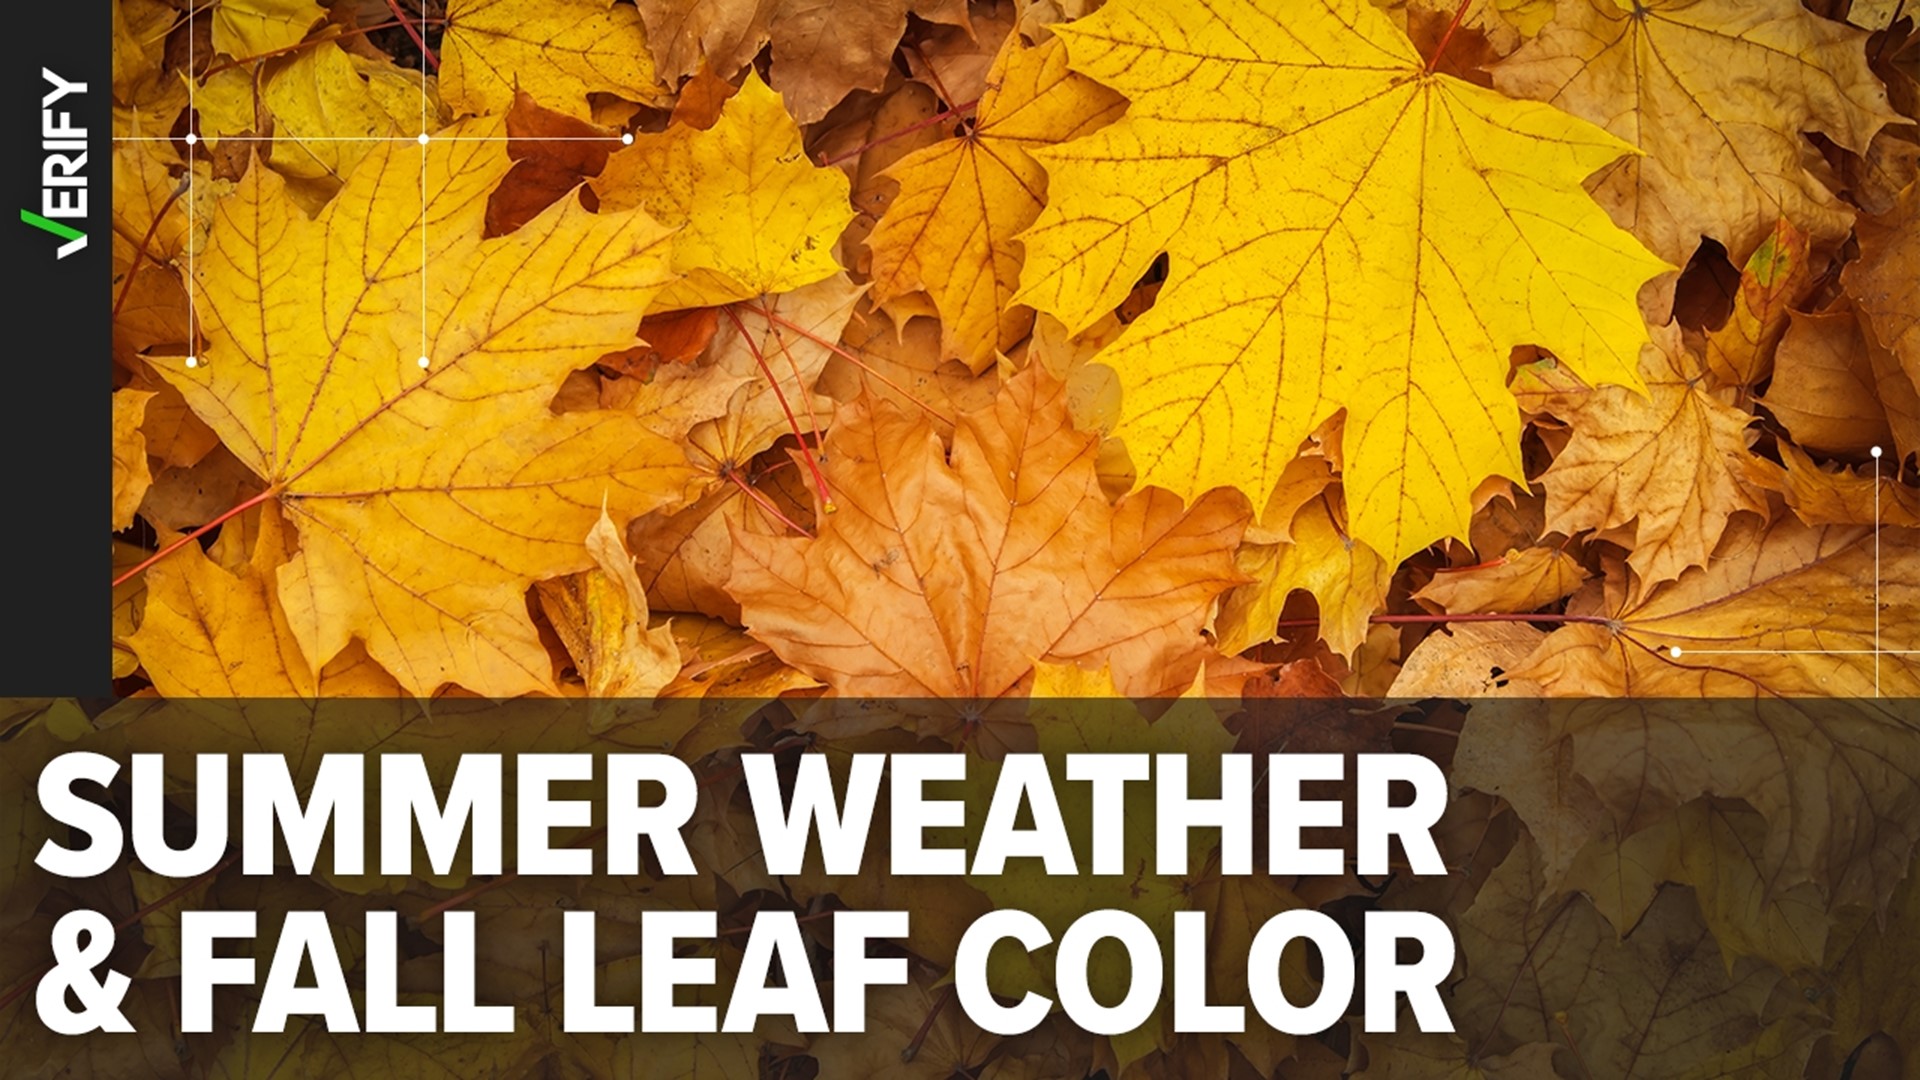 Here's everything you need to know about fall